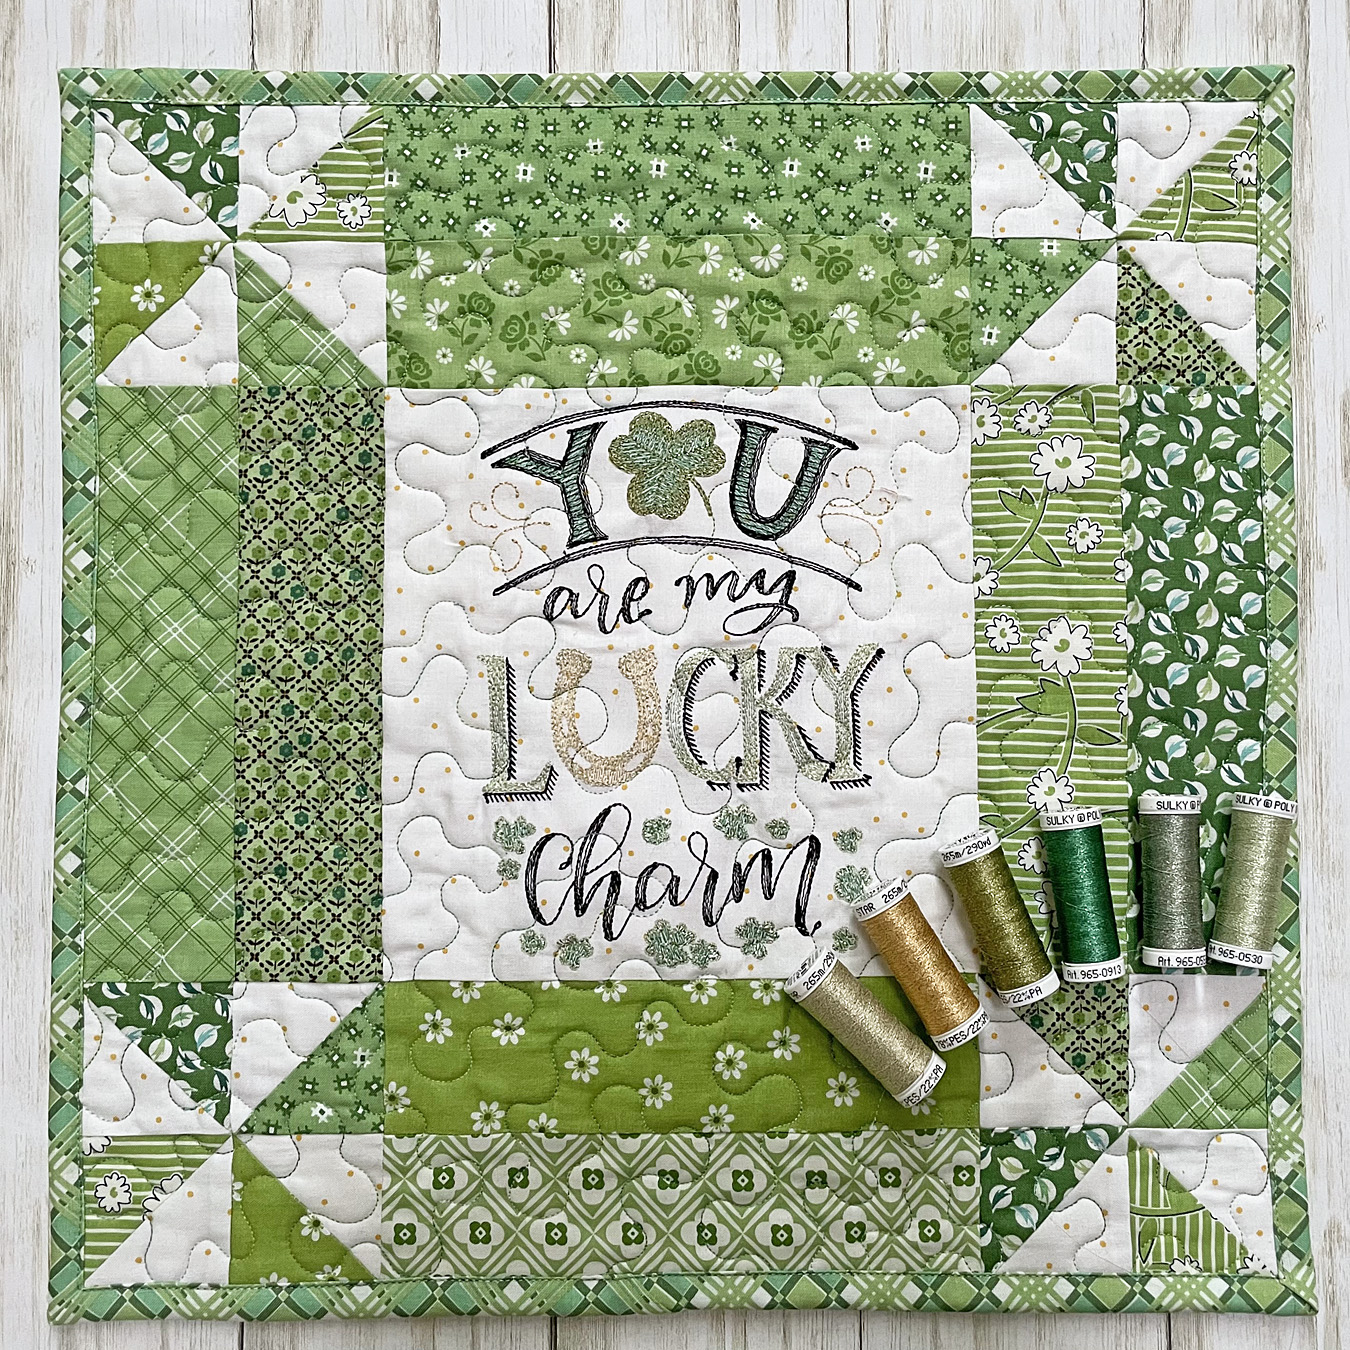 Mini quilt for st patricks day with machine embroidery